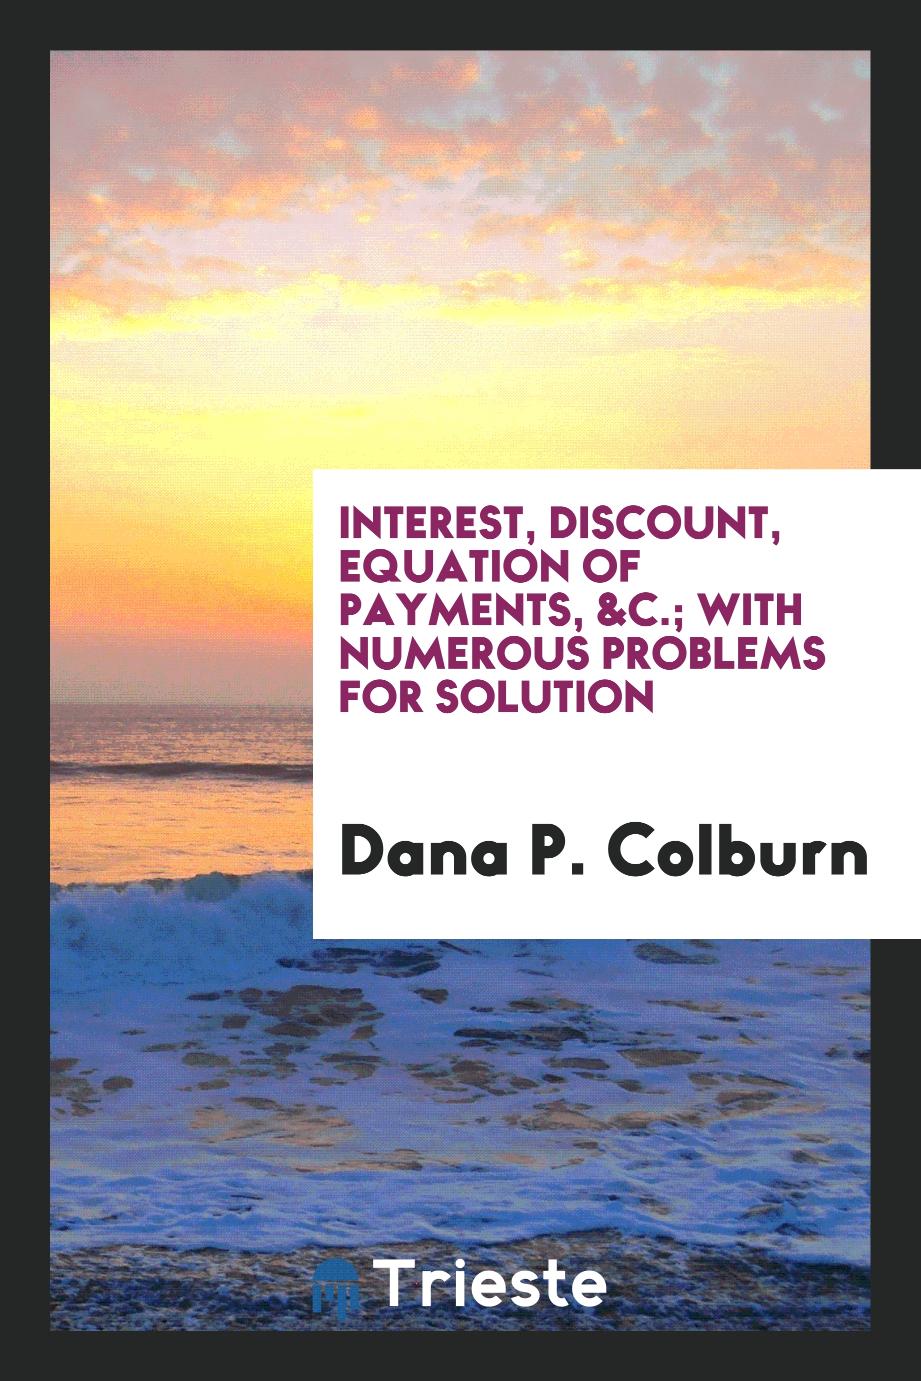 Interest, Discount, Equation of Payments, &C.; With Numerous Problems for Solution